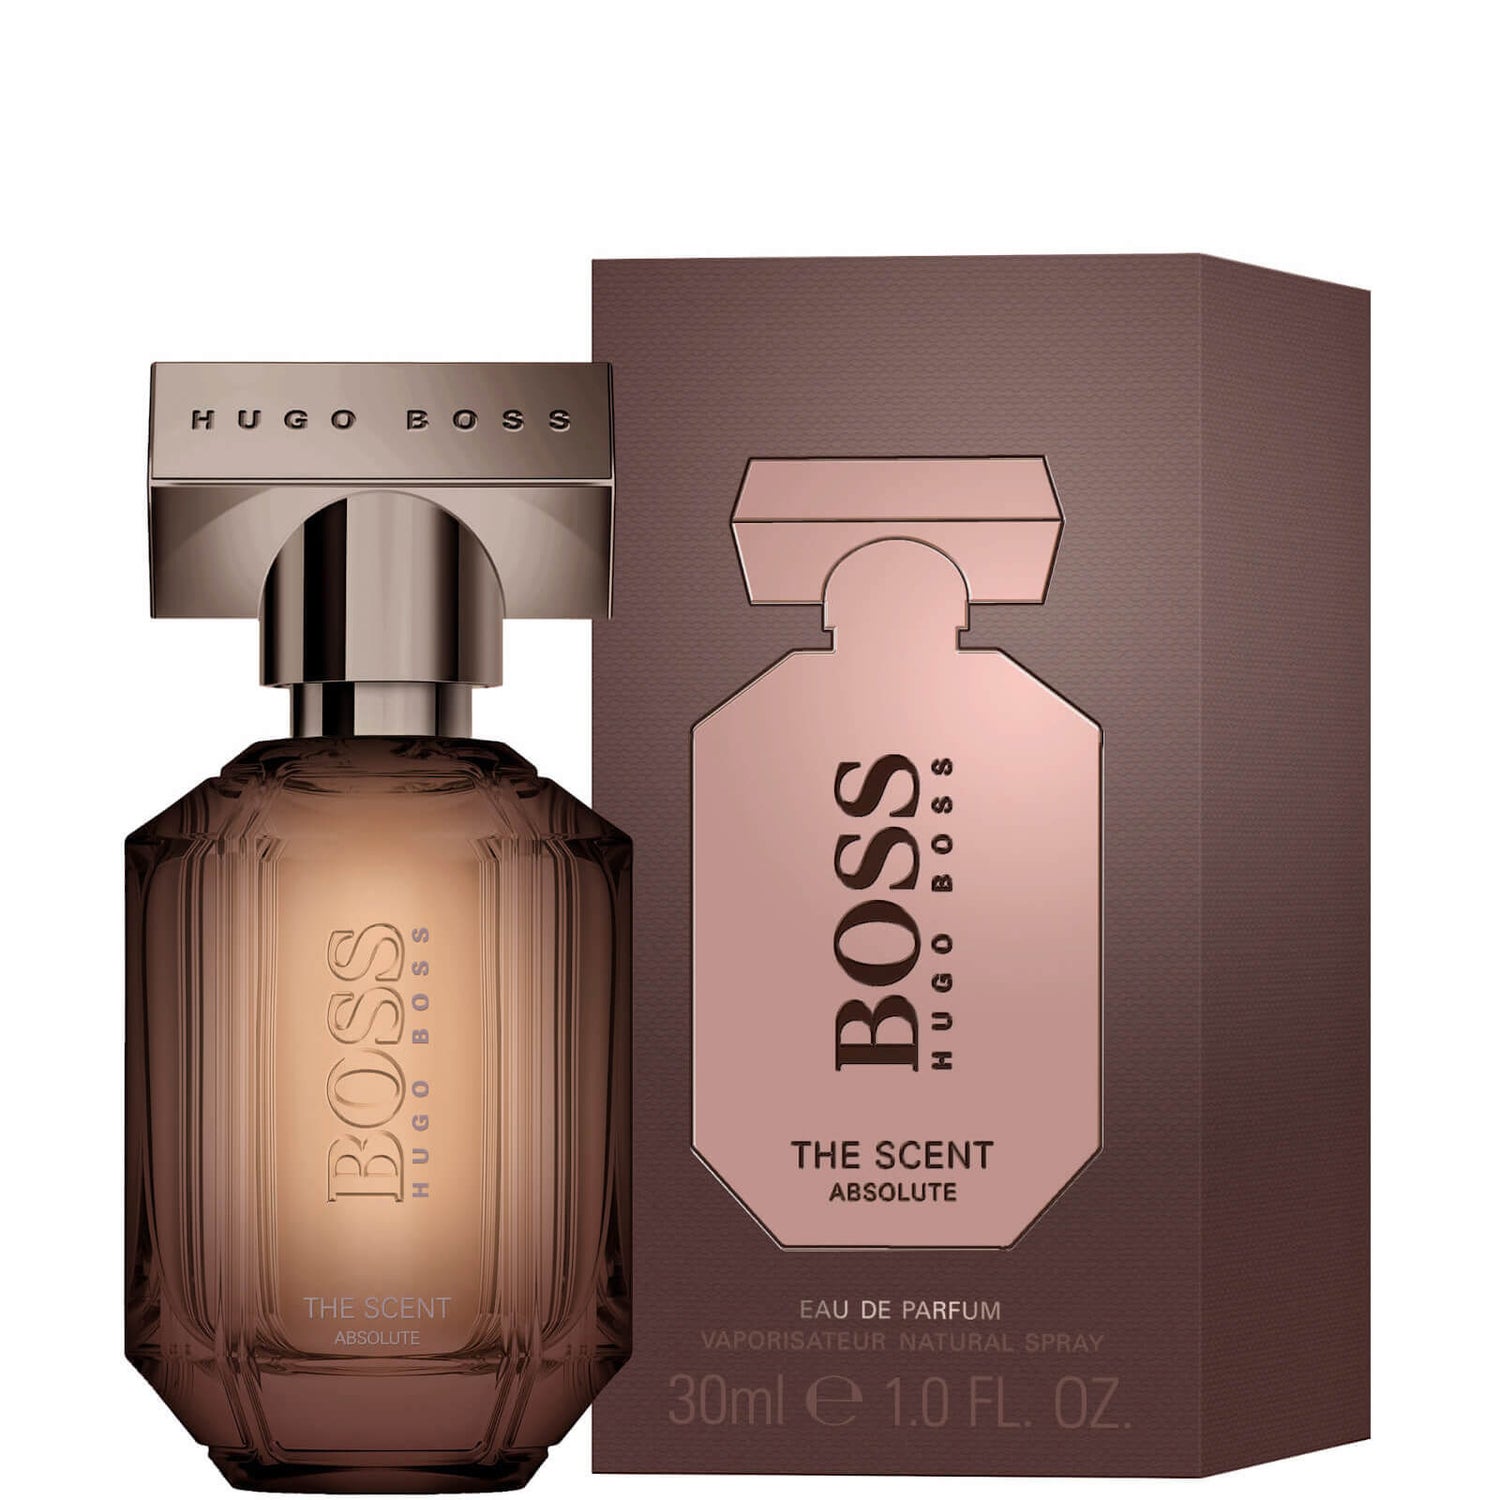 The scent absolute. Hugo Boss the Scent absolute Eau de Parfum 100 ml. The Scent absolute от Hugo Boss (50 мл). Boss Hugo Boss the Scent le Parfum. Boss the Scent intense for her EDP 100мл.